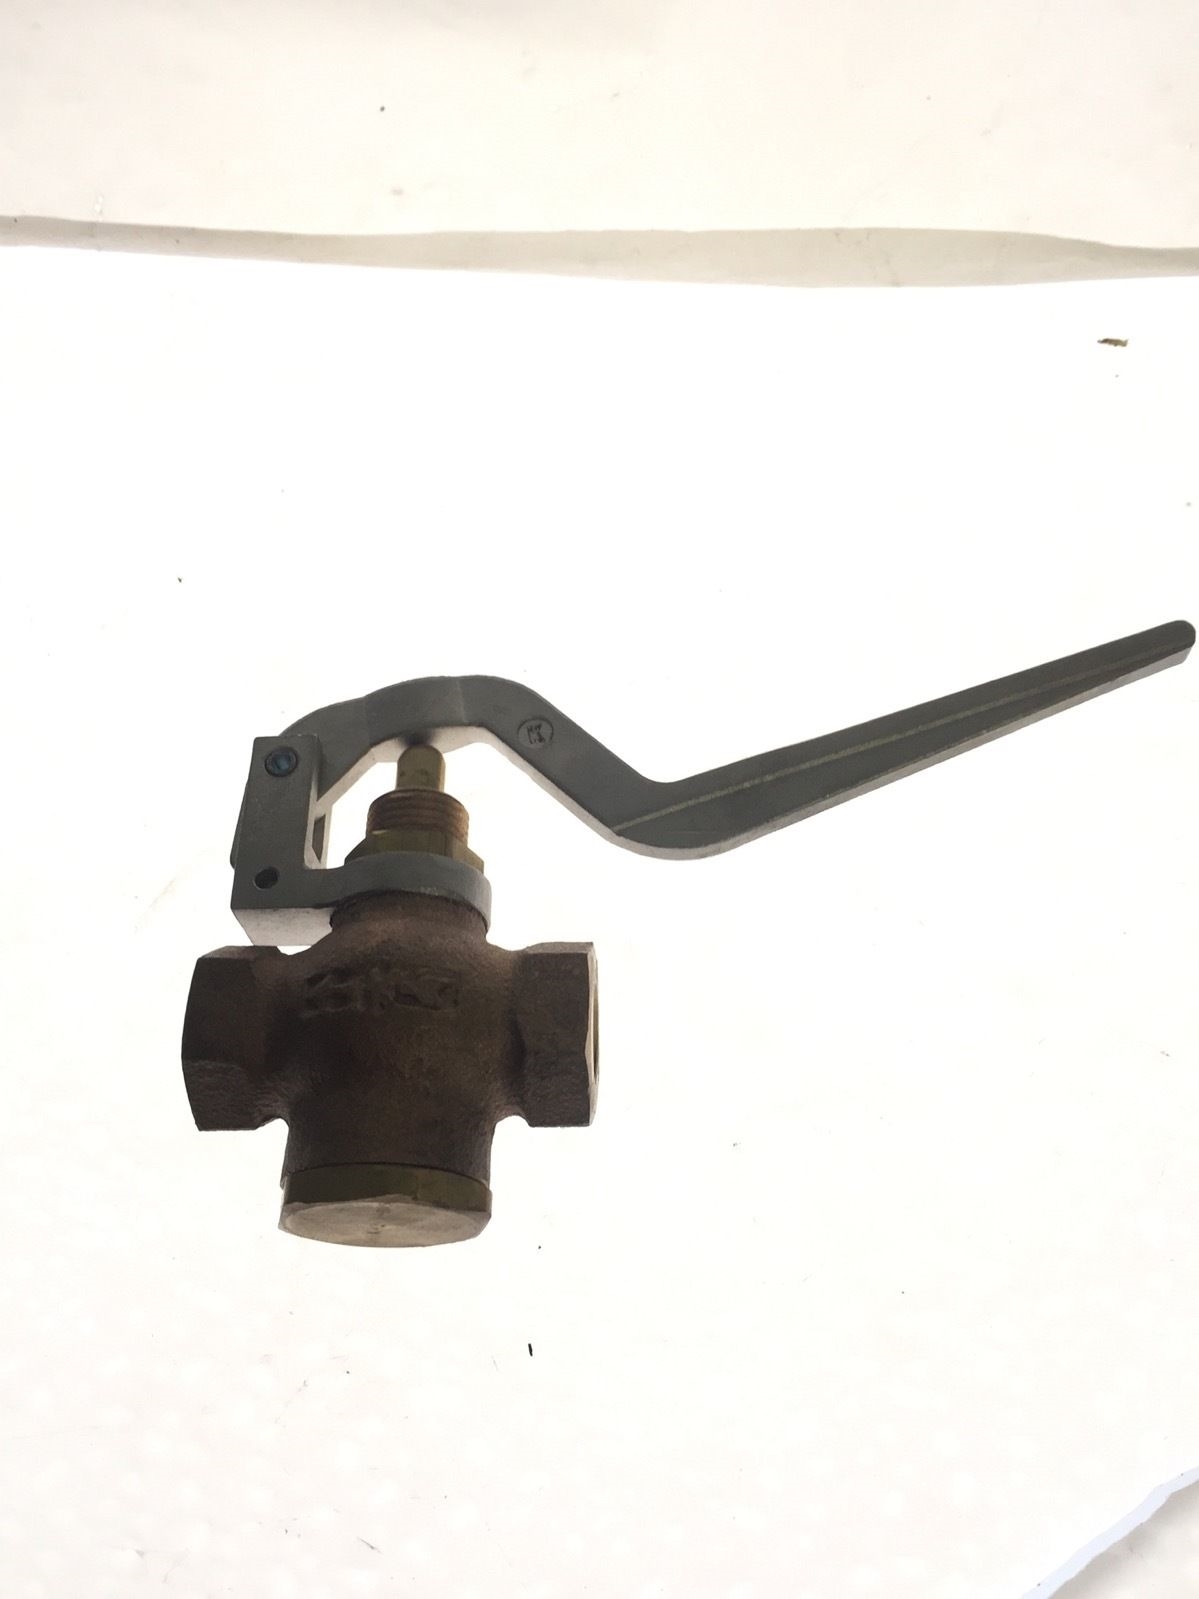 KINGSTON 305A-2-1-B05 Normally Closed, Quick Opening Valve WITH LEVER, NEW, G07 2